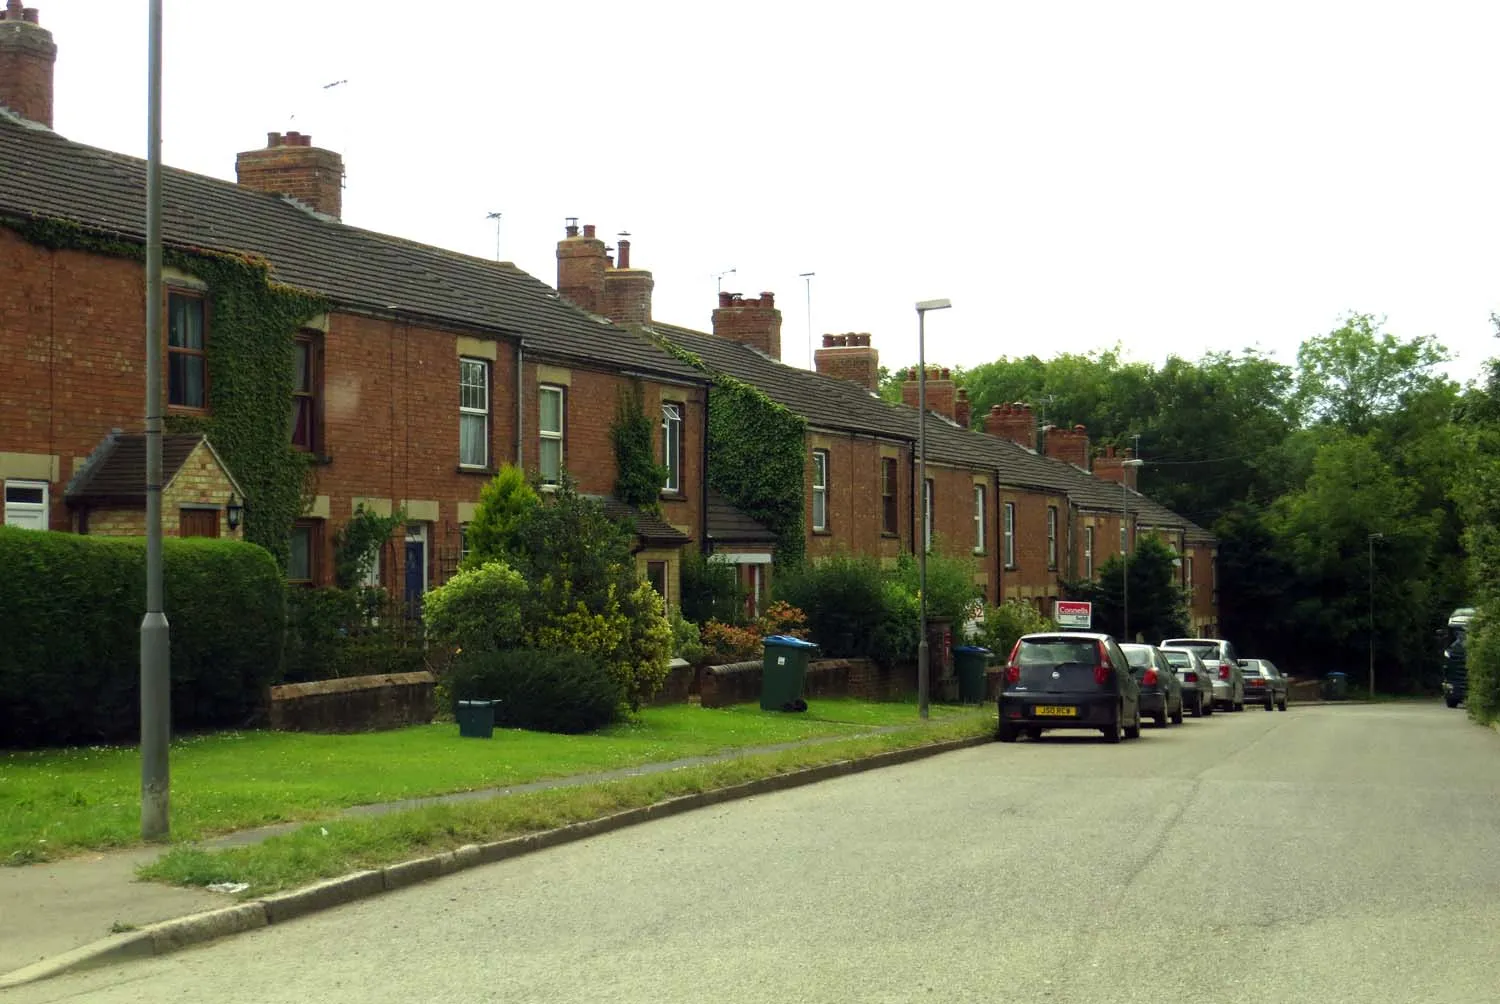 Photo showing: A row of houses in Calvert